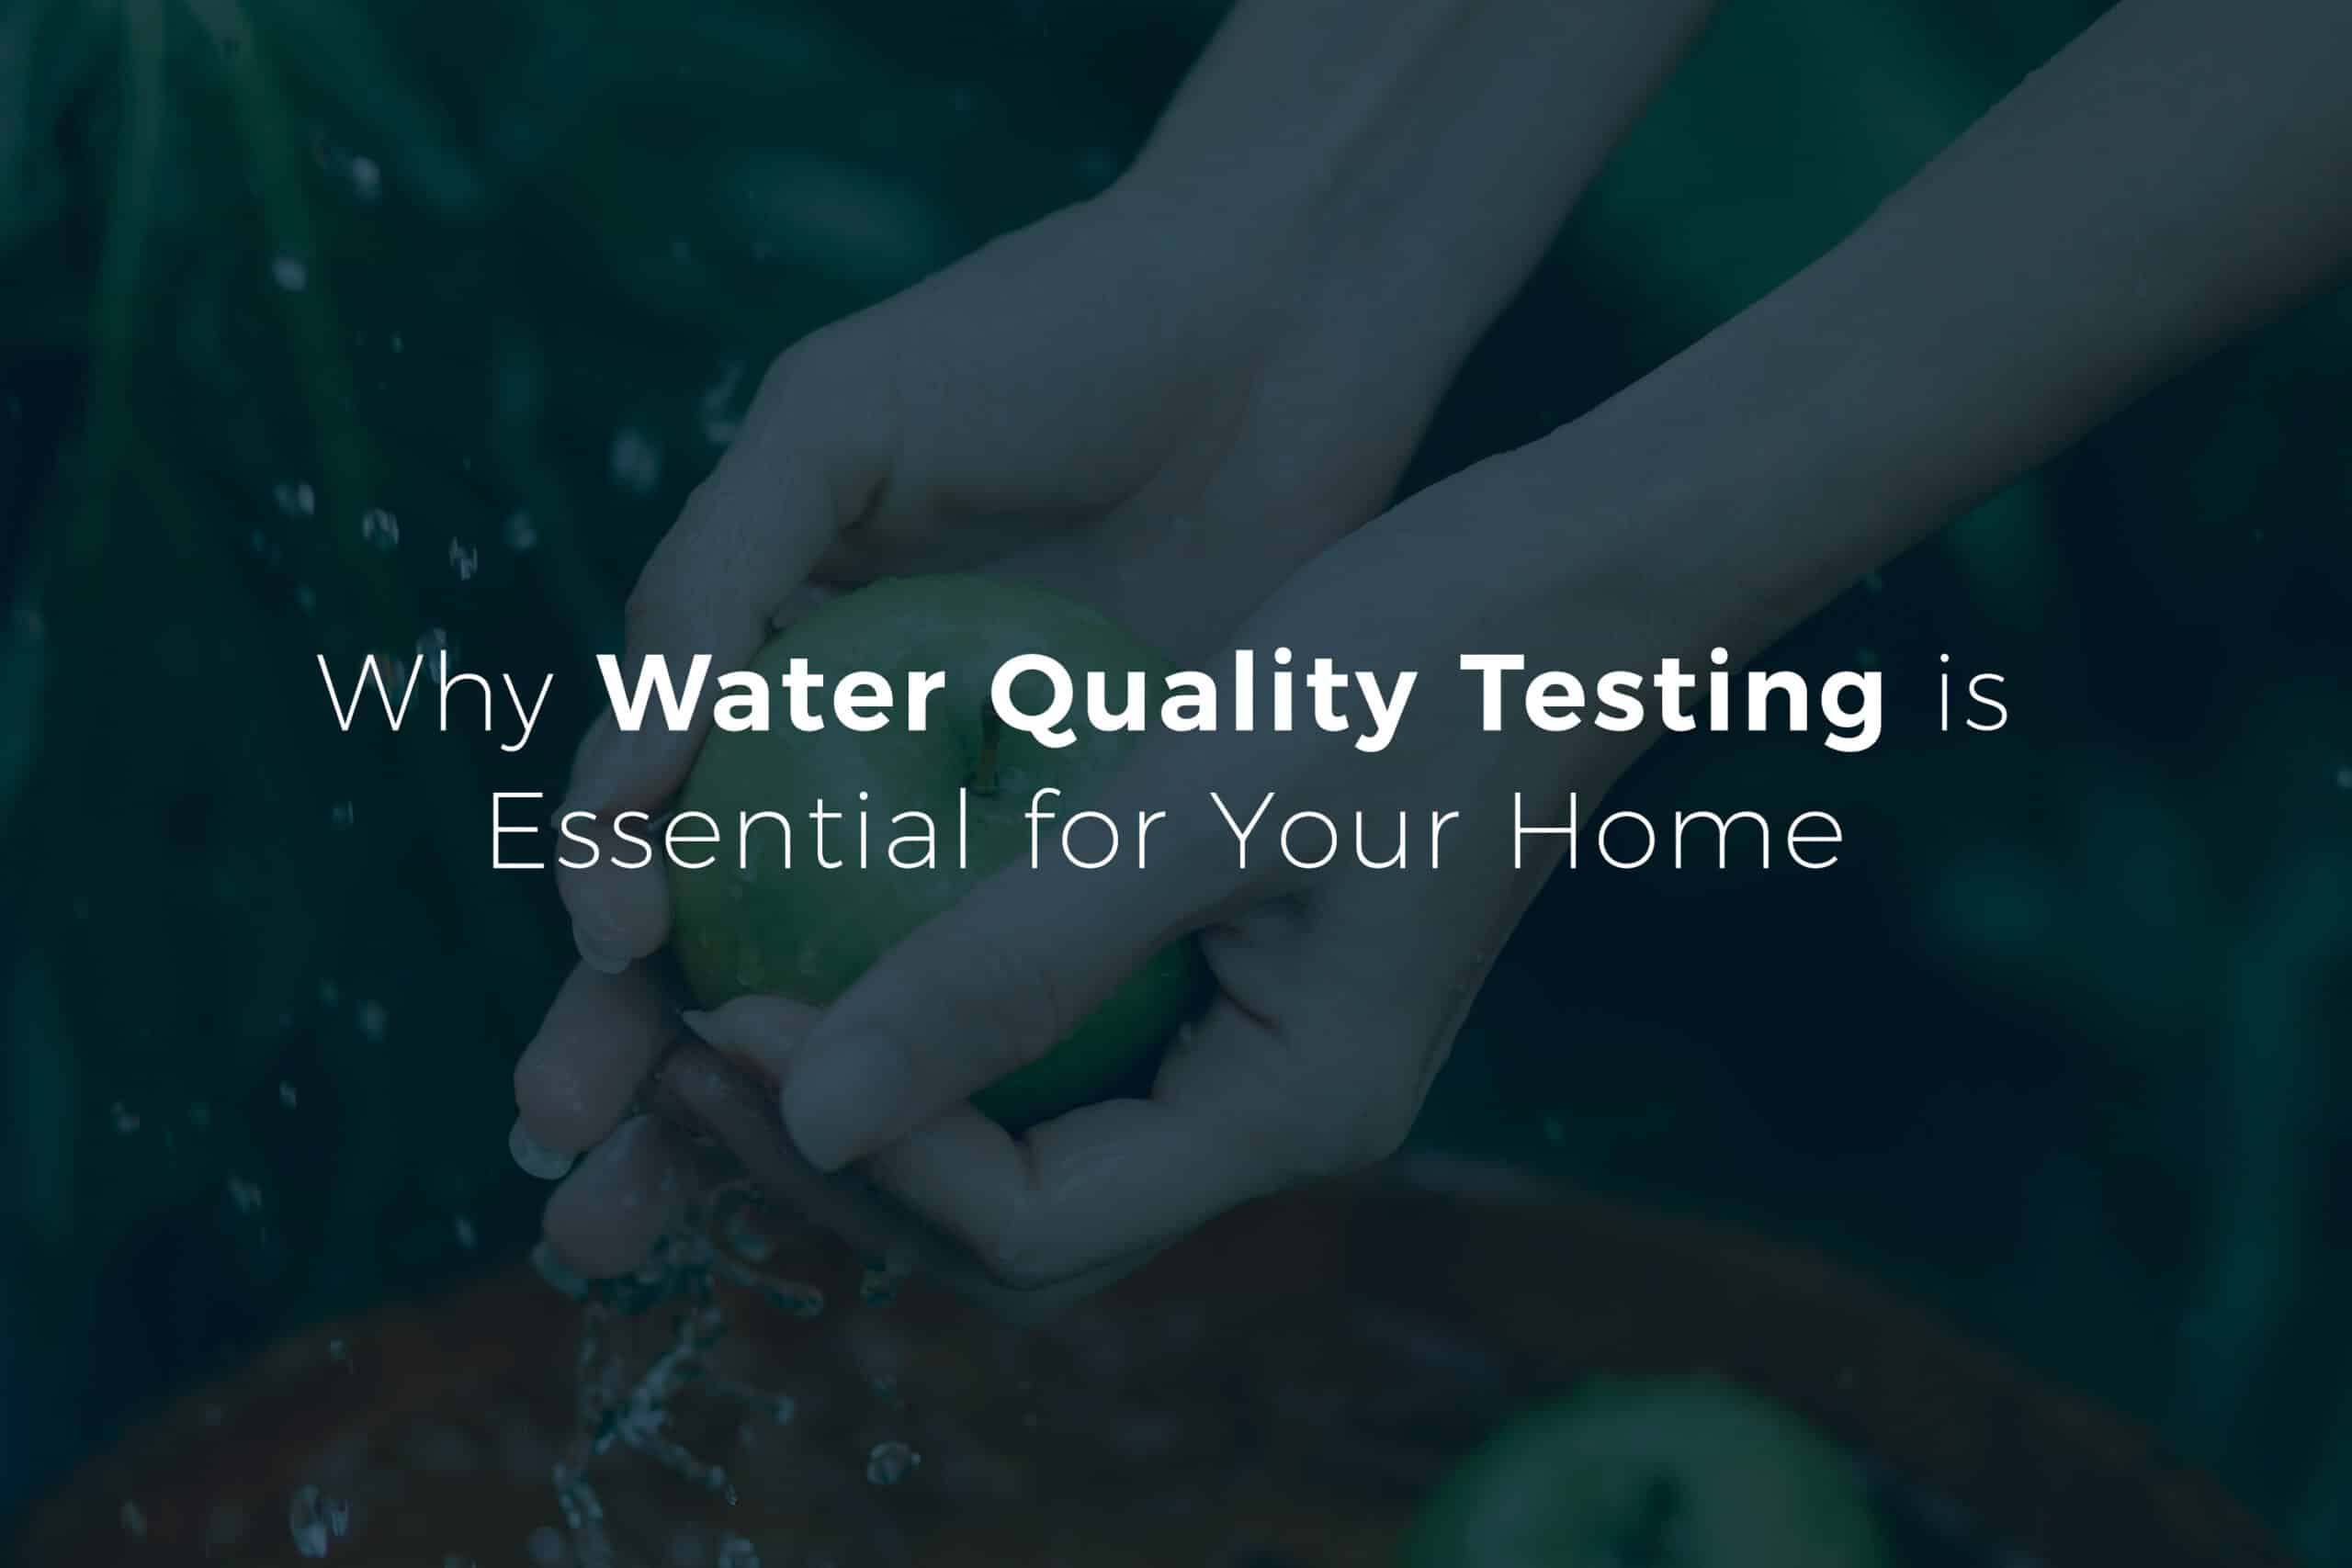 Why Water Quality Testing is Essential to your Home.